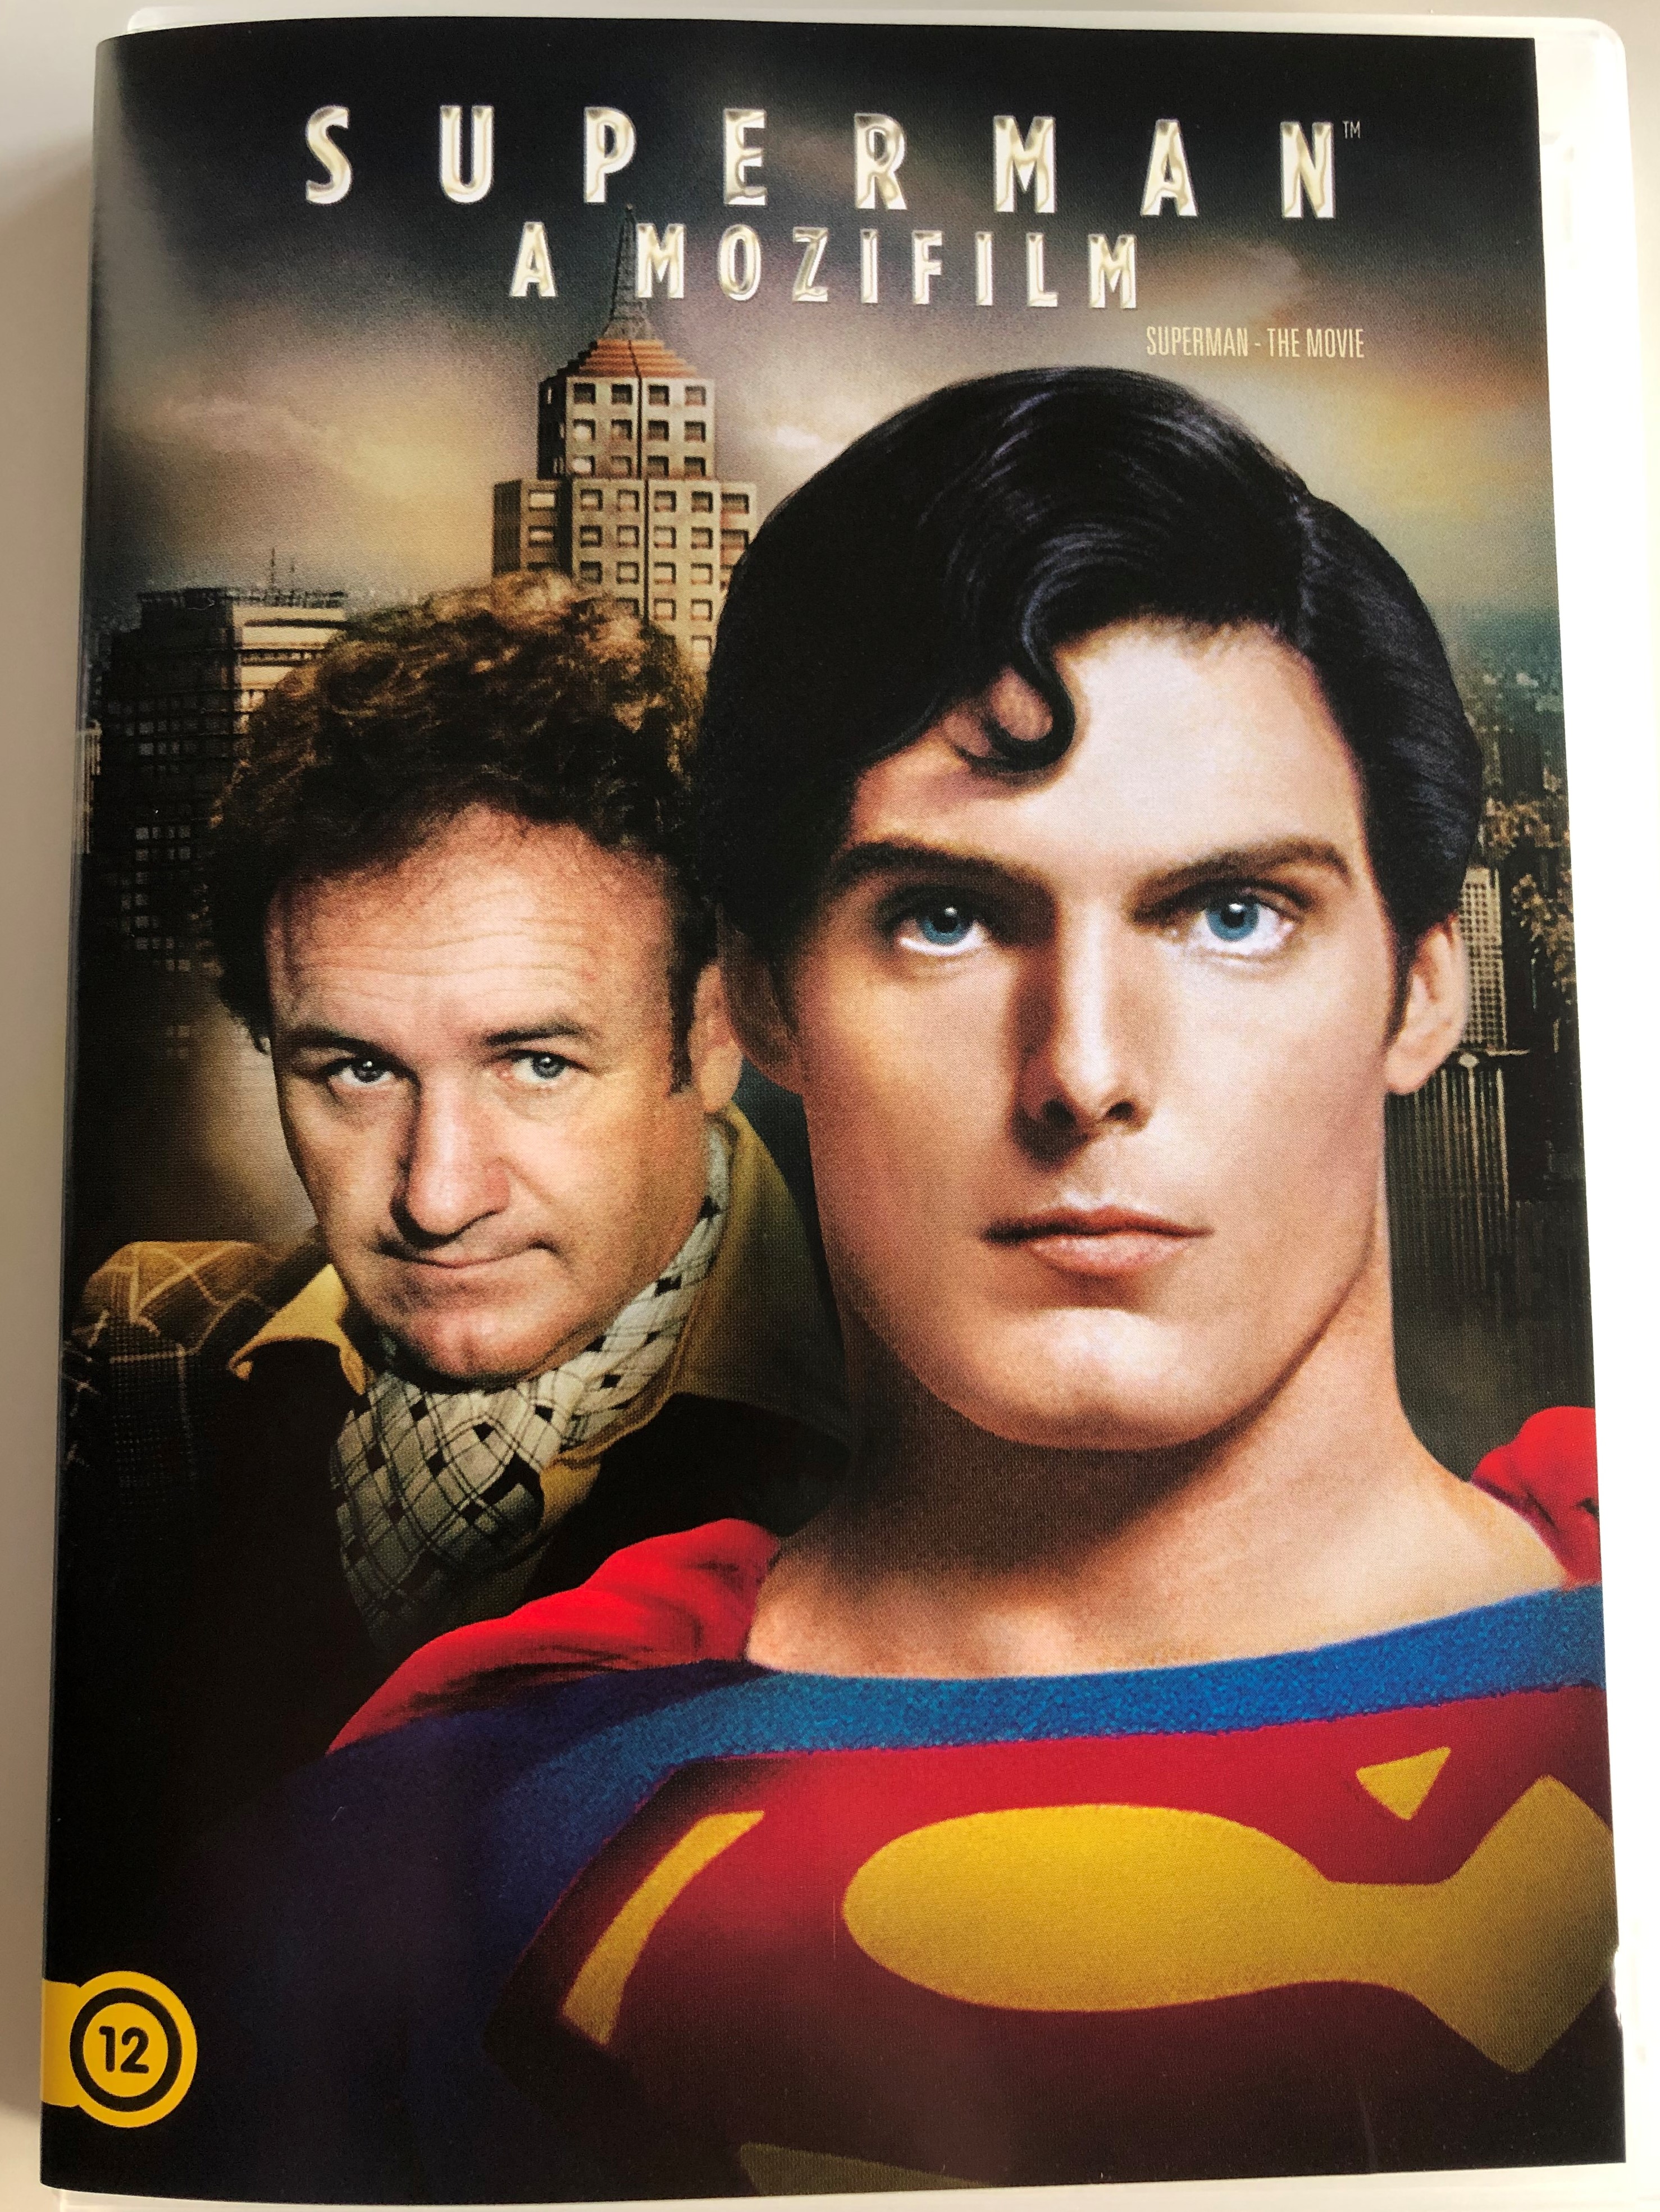 Superman - The Movie DVD Superman - A Mozifilm / Directed by Richard Donner  / Starring: Christopher Reeve, Ned Beatty, Jackie Cooper, Glenn Ford -  bibleinmylanguage